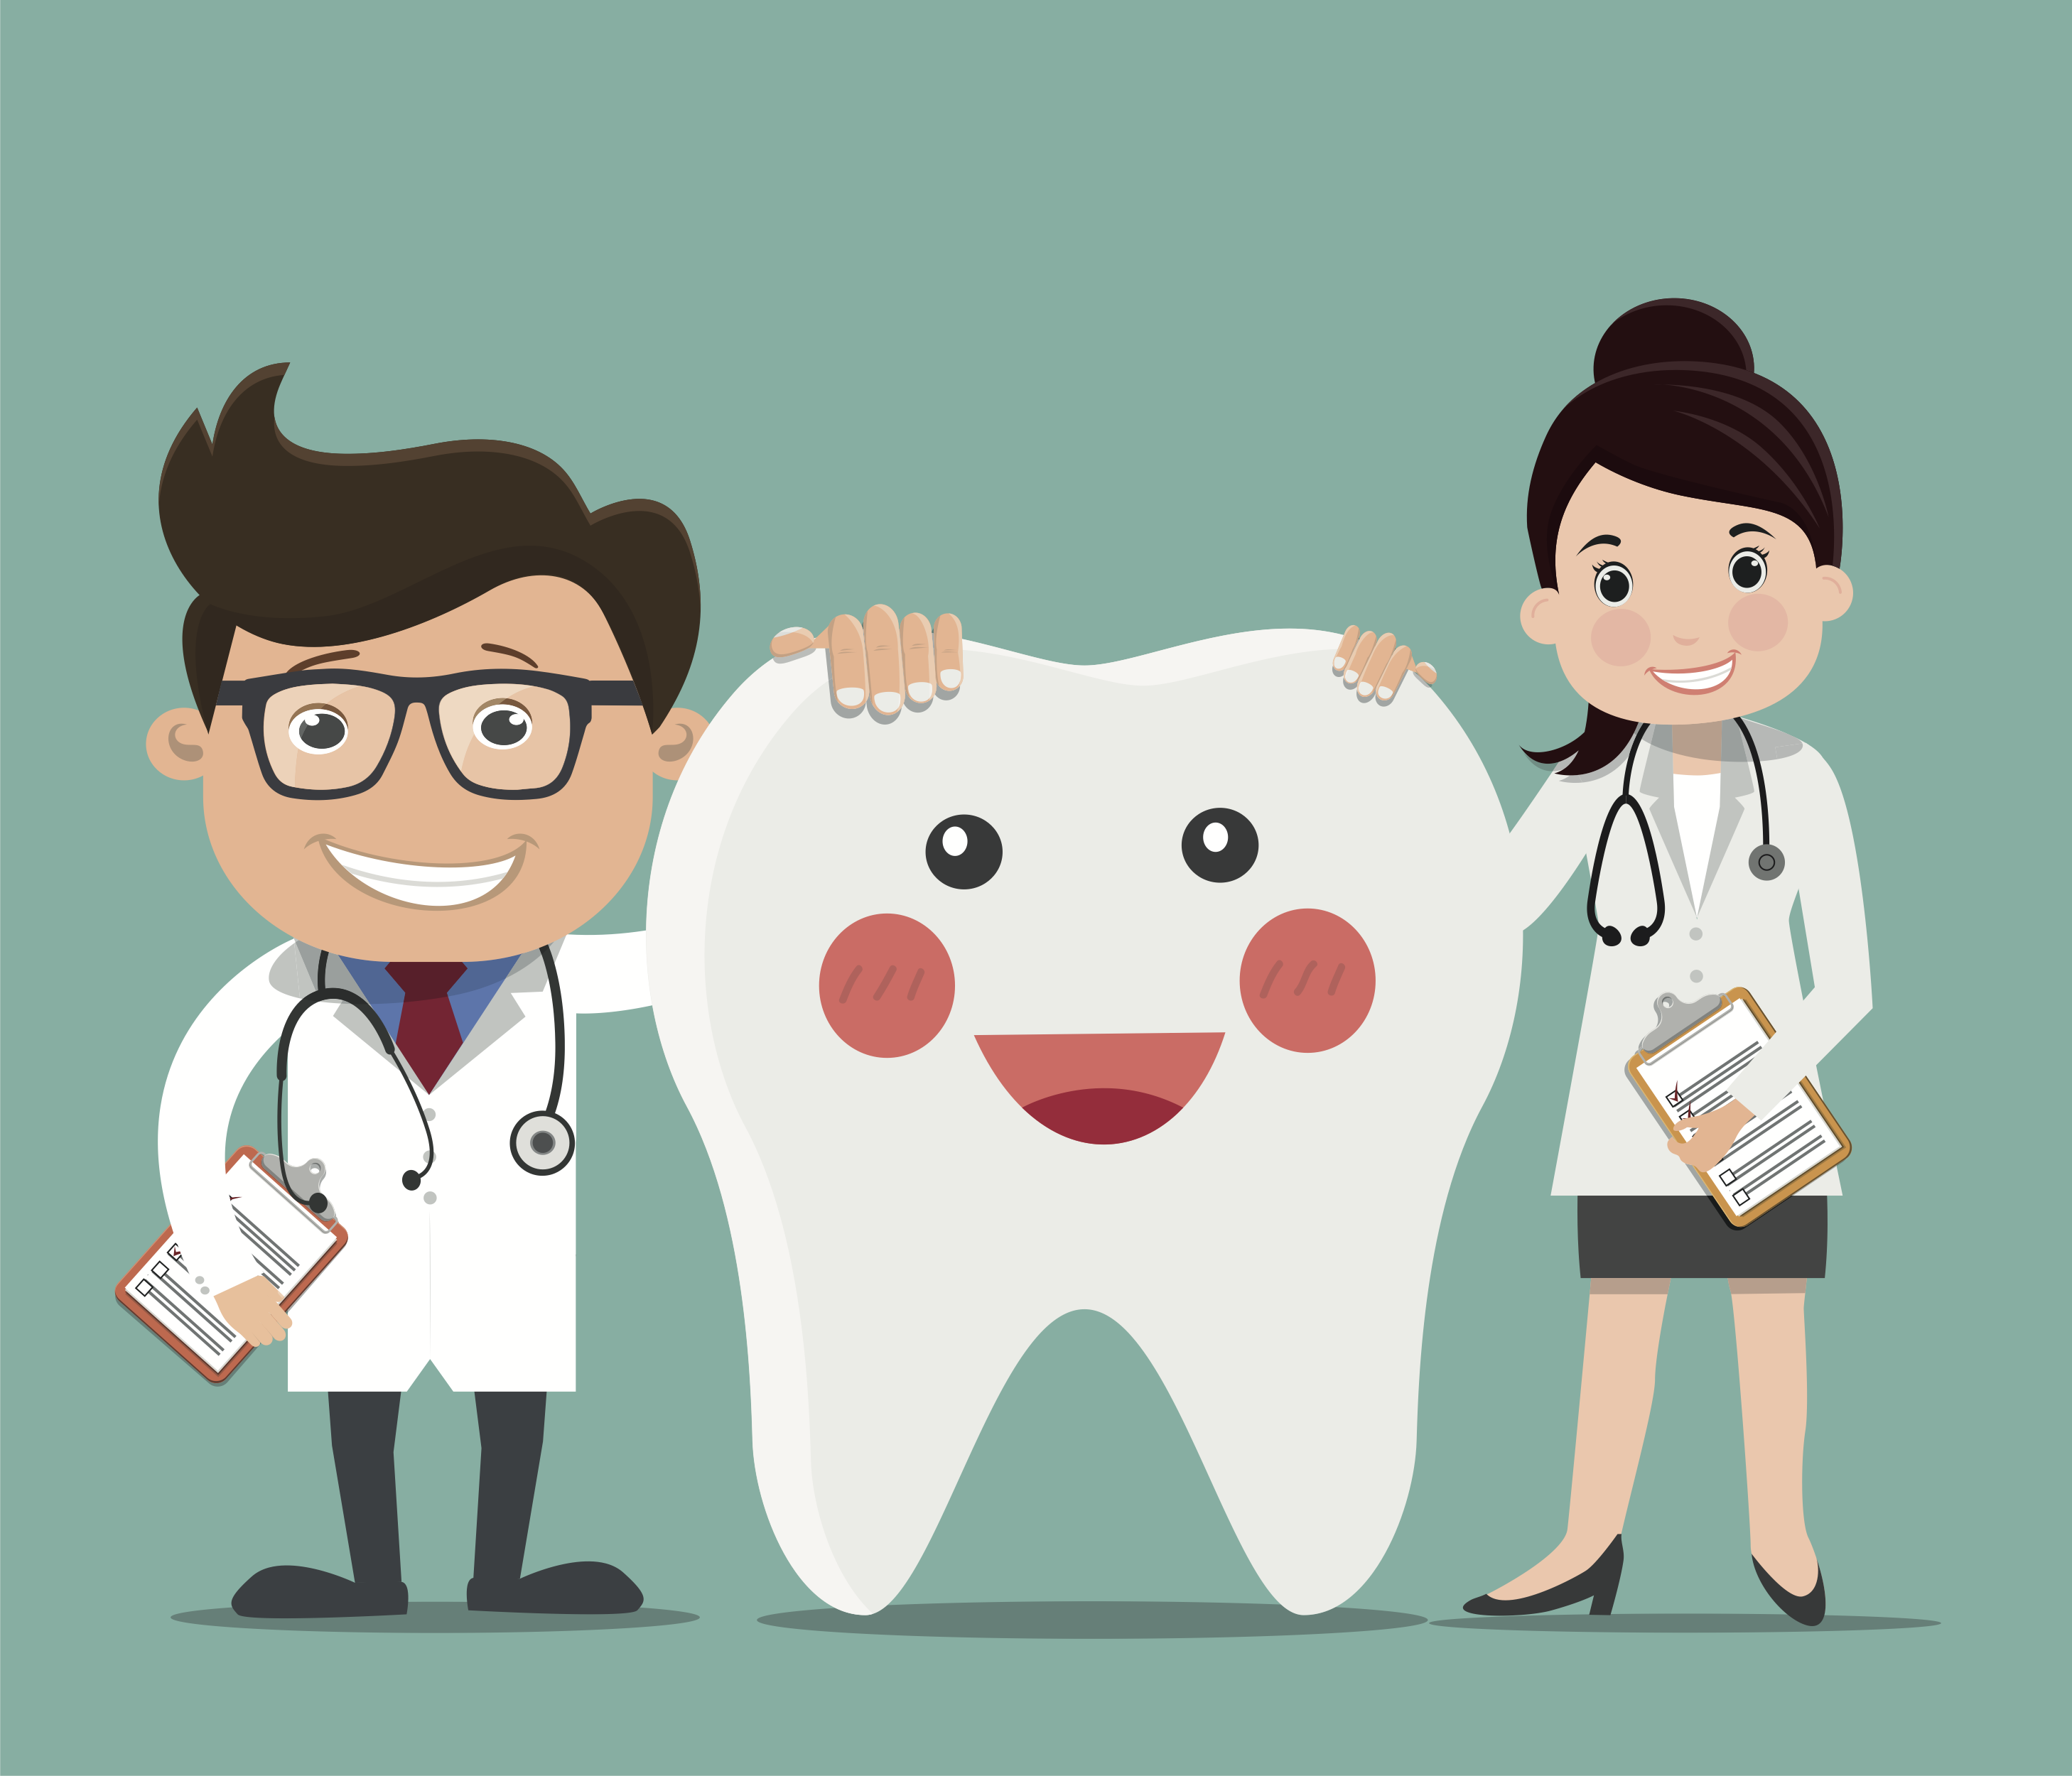 Dental Health Benefits You Can’t Afford to Lose